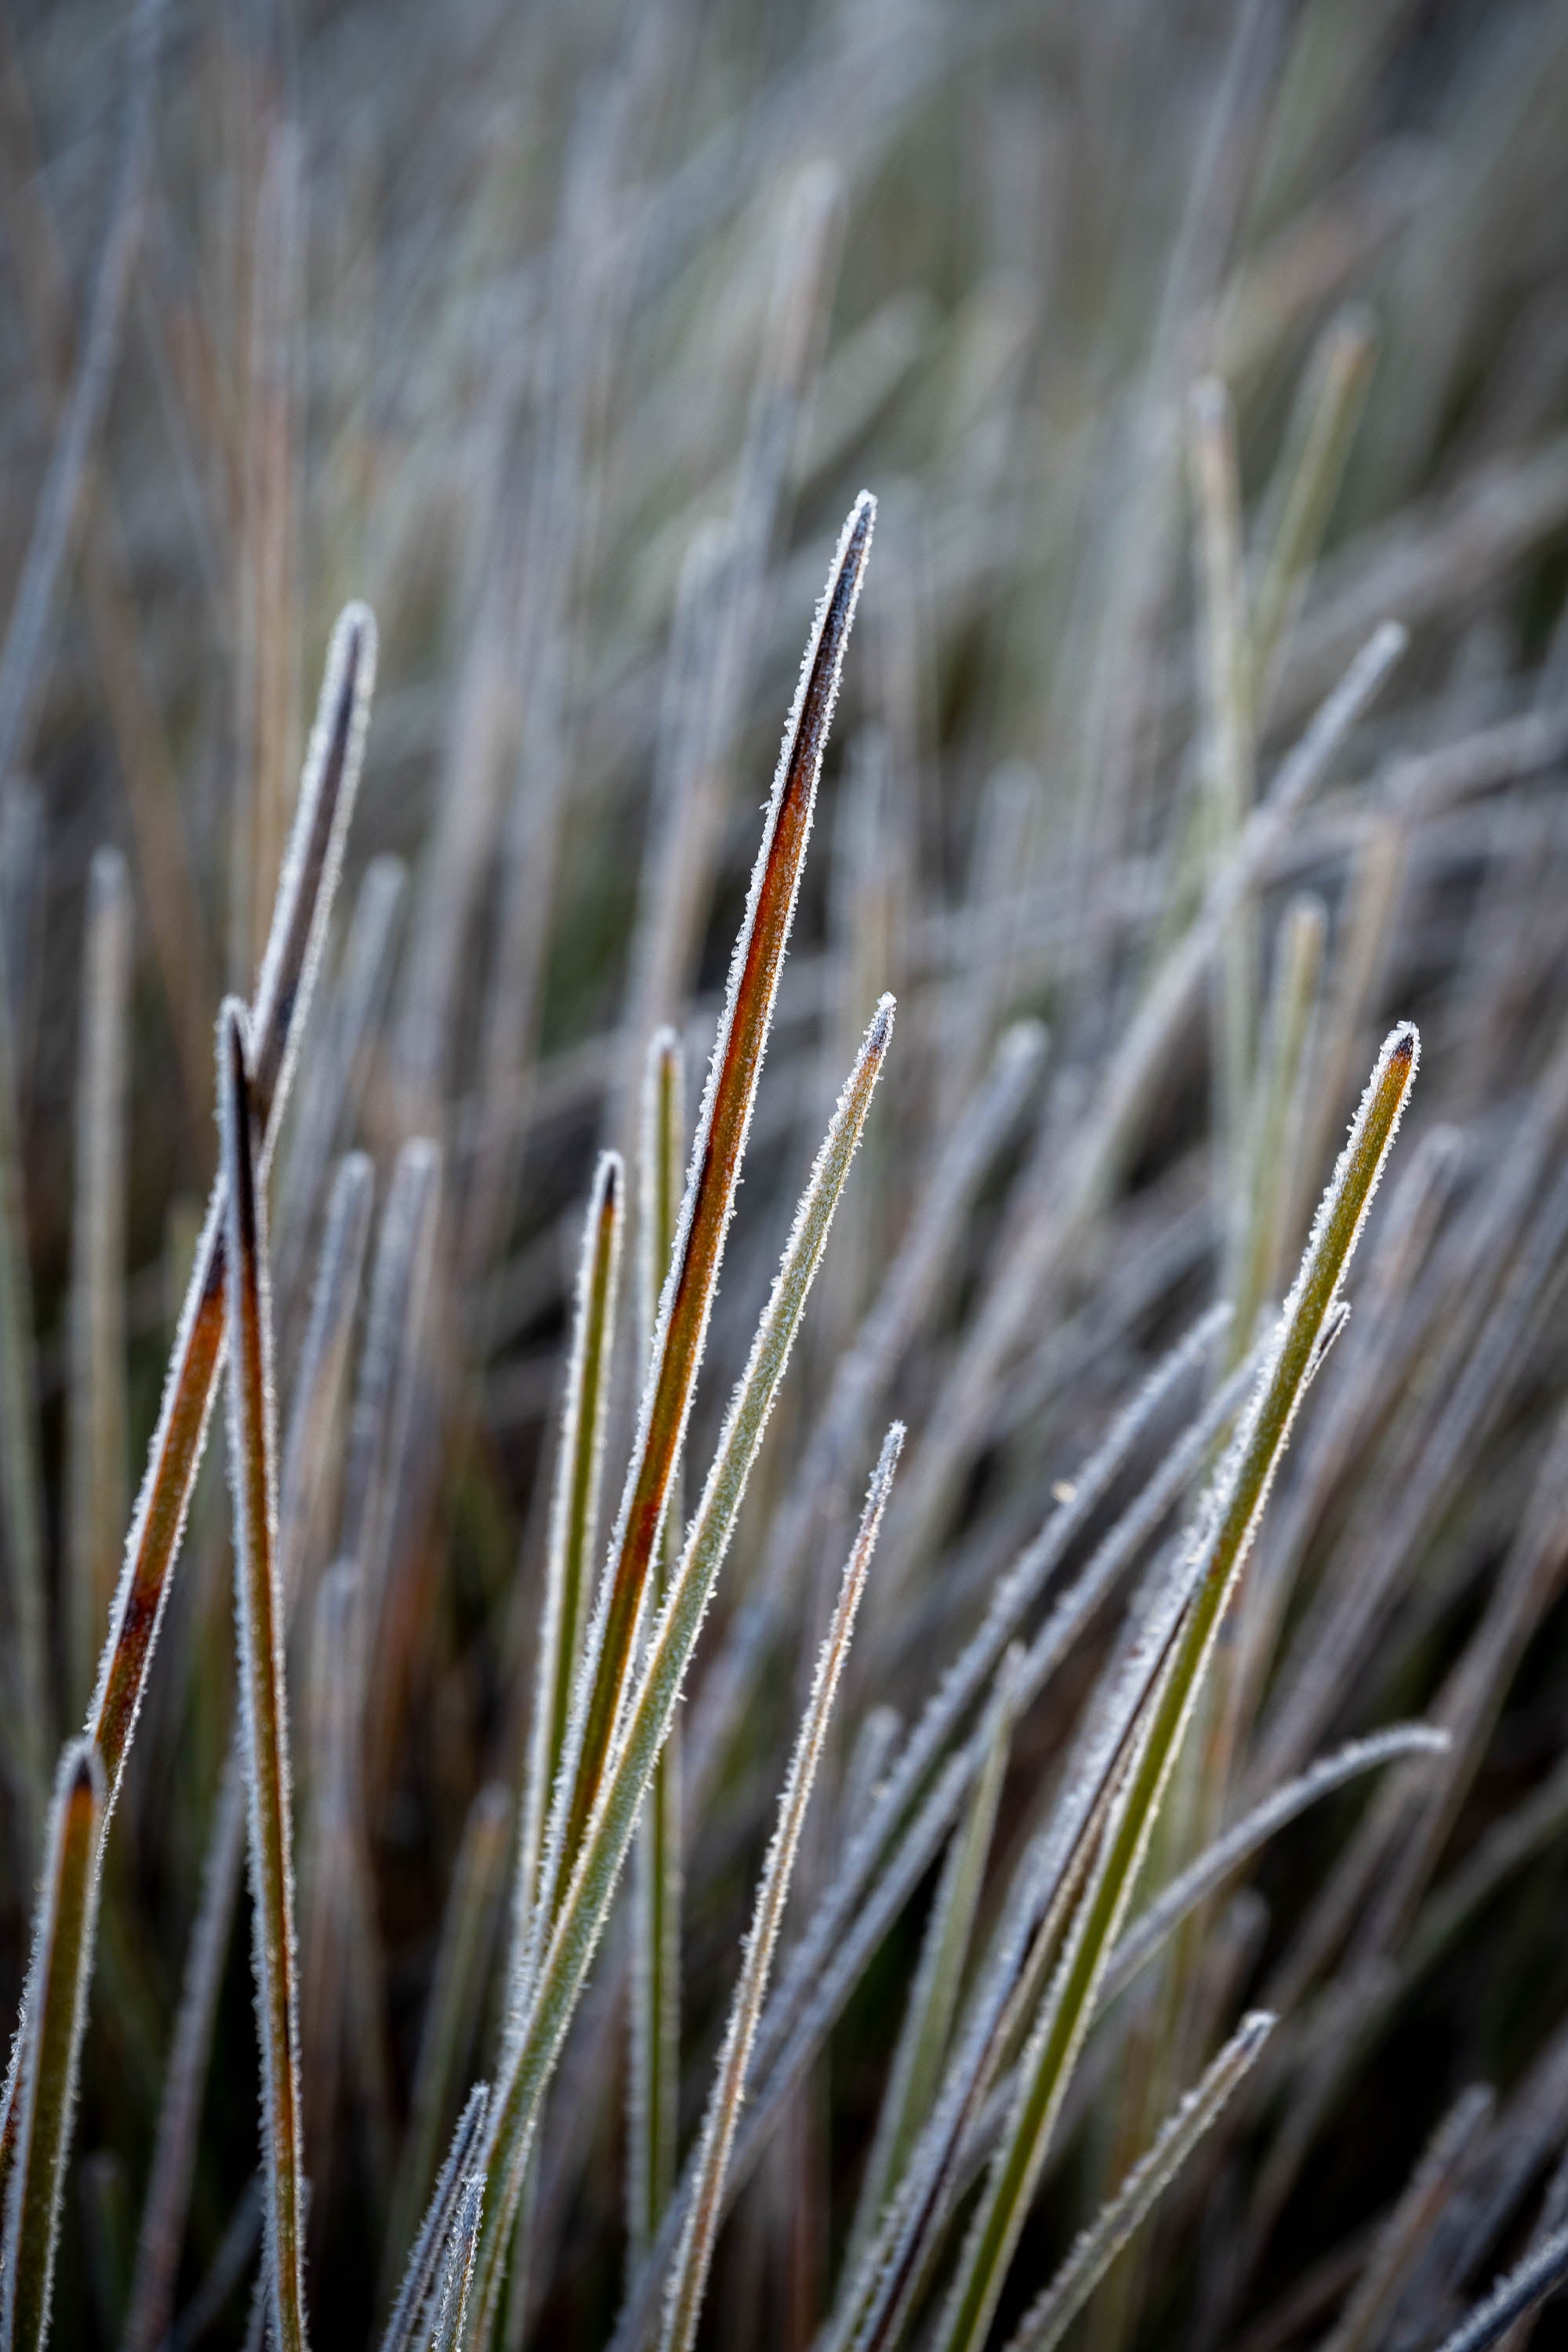 Frosted Buttongrass detail, Cradle Mountain, Tasmania